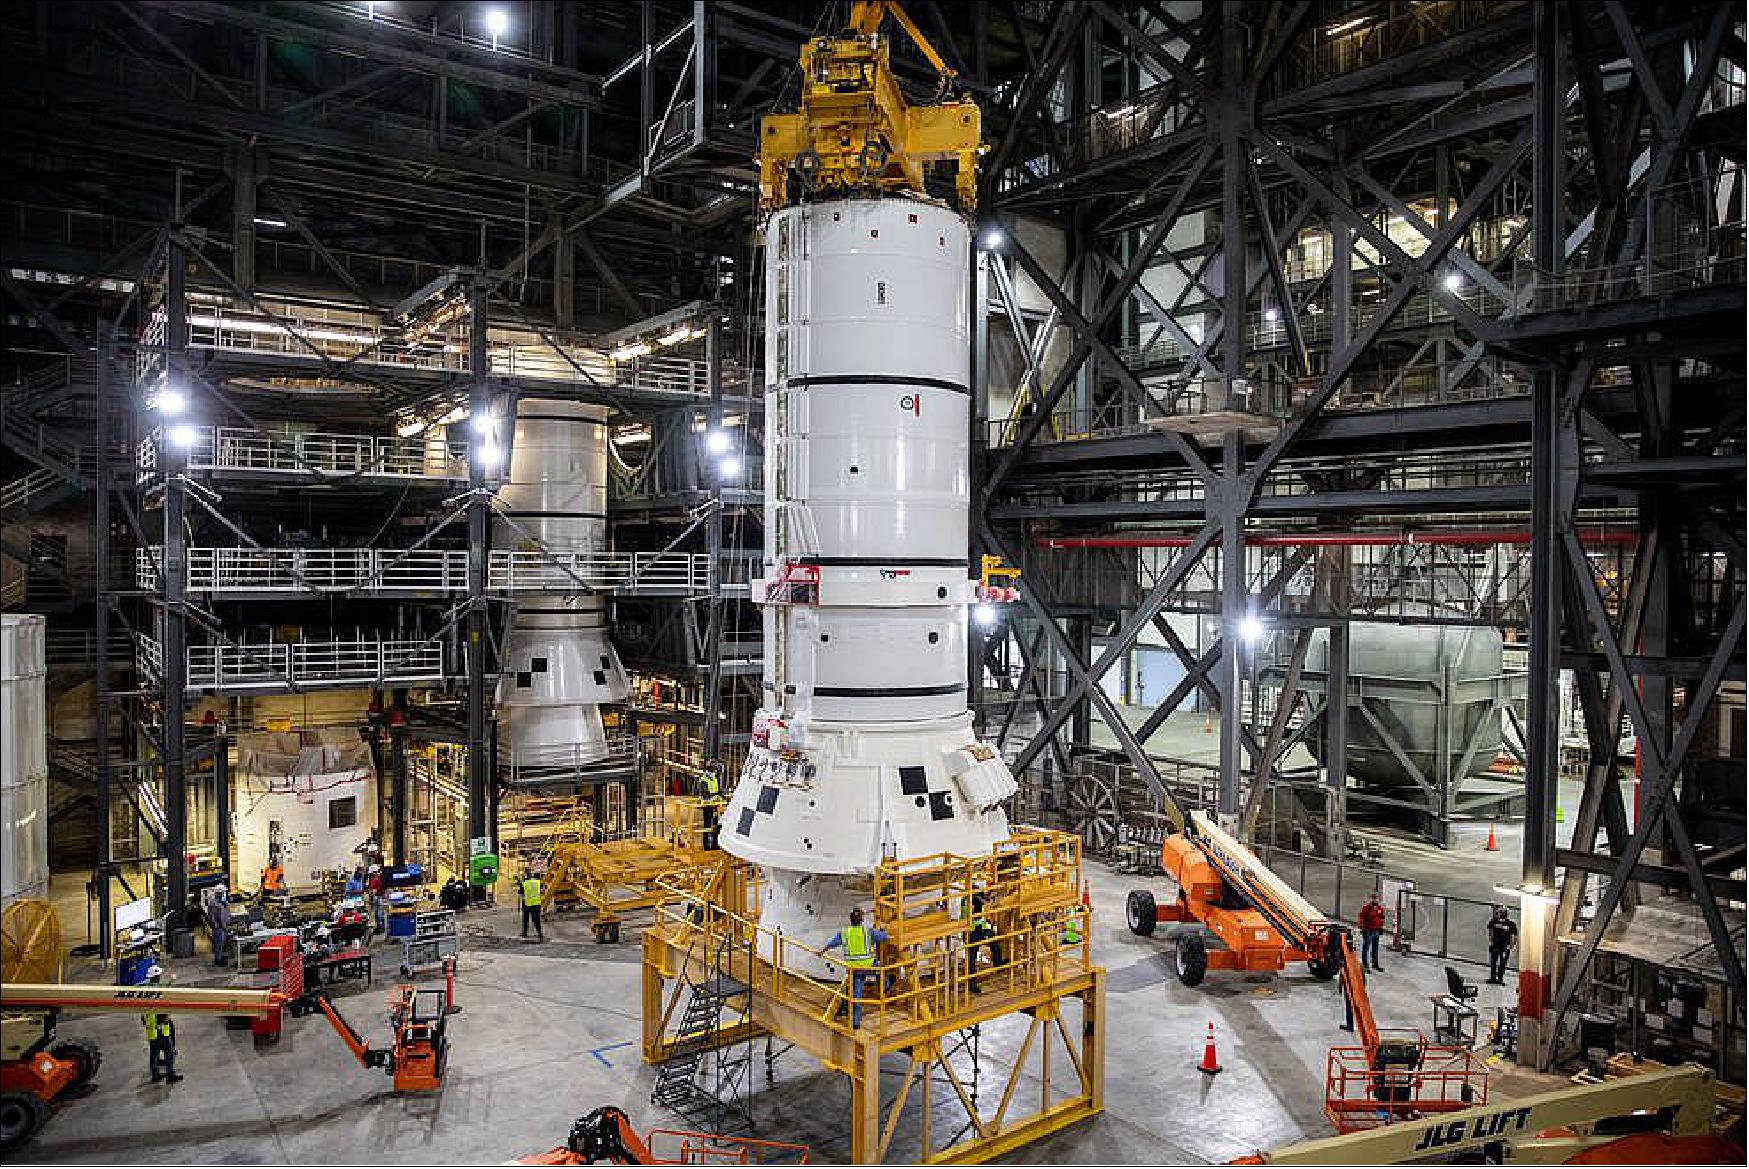 Figure 33: The solid rocket boosters are the first components of the SLS rocket to be stacked and will help support the remaining rocket pieces and the Orion spacecraft (image credit: NASA/Kim Shiflett)